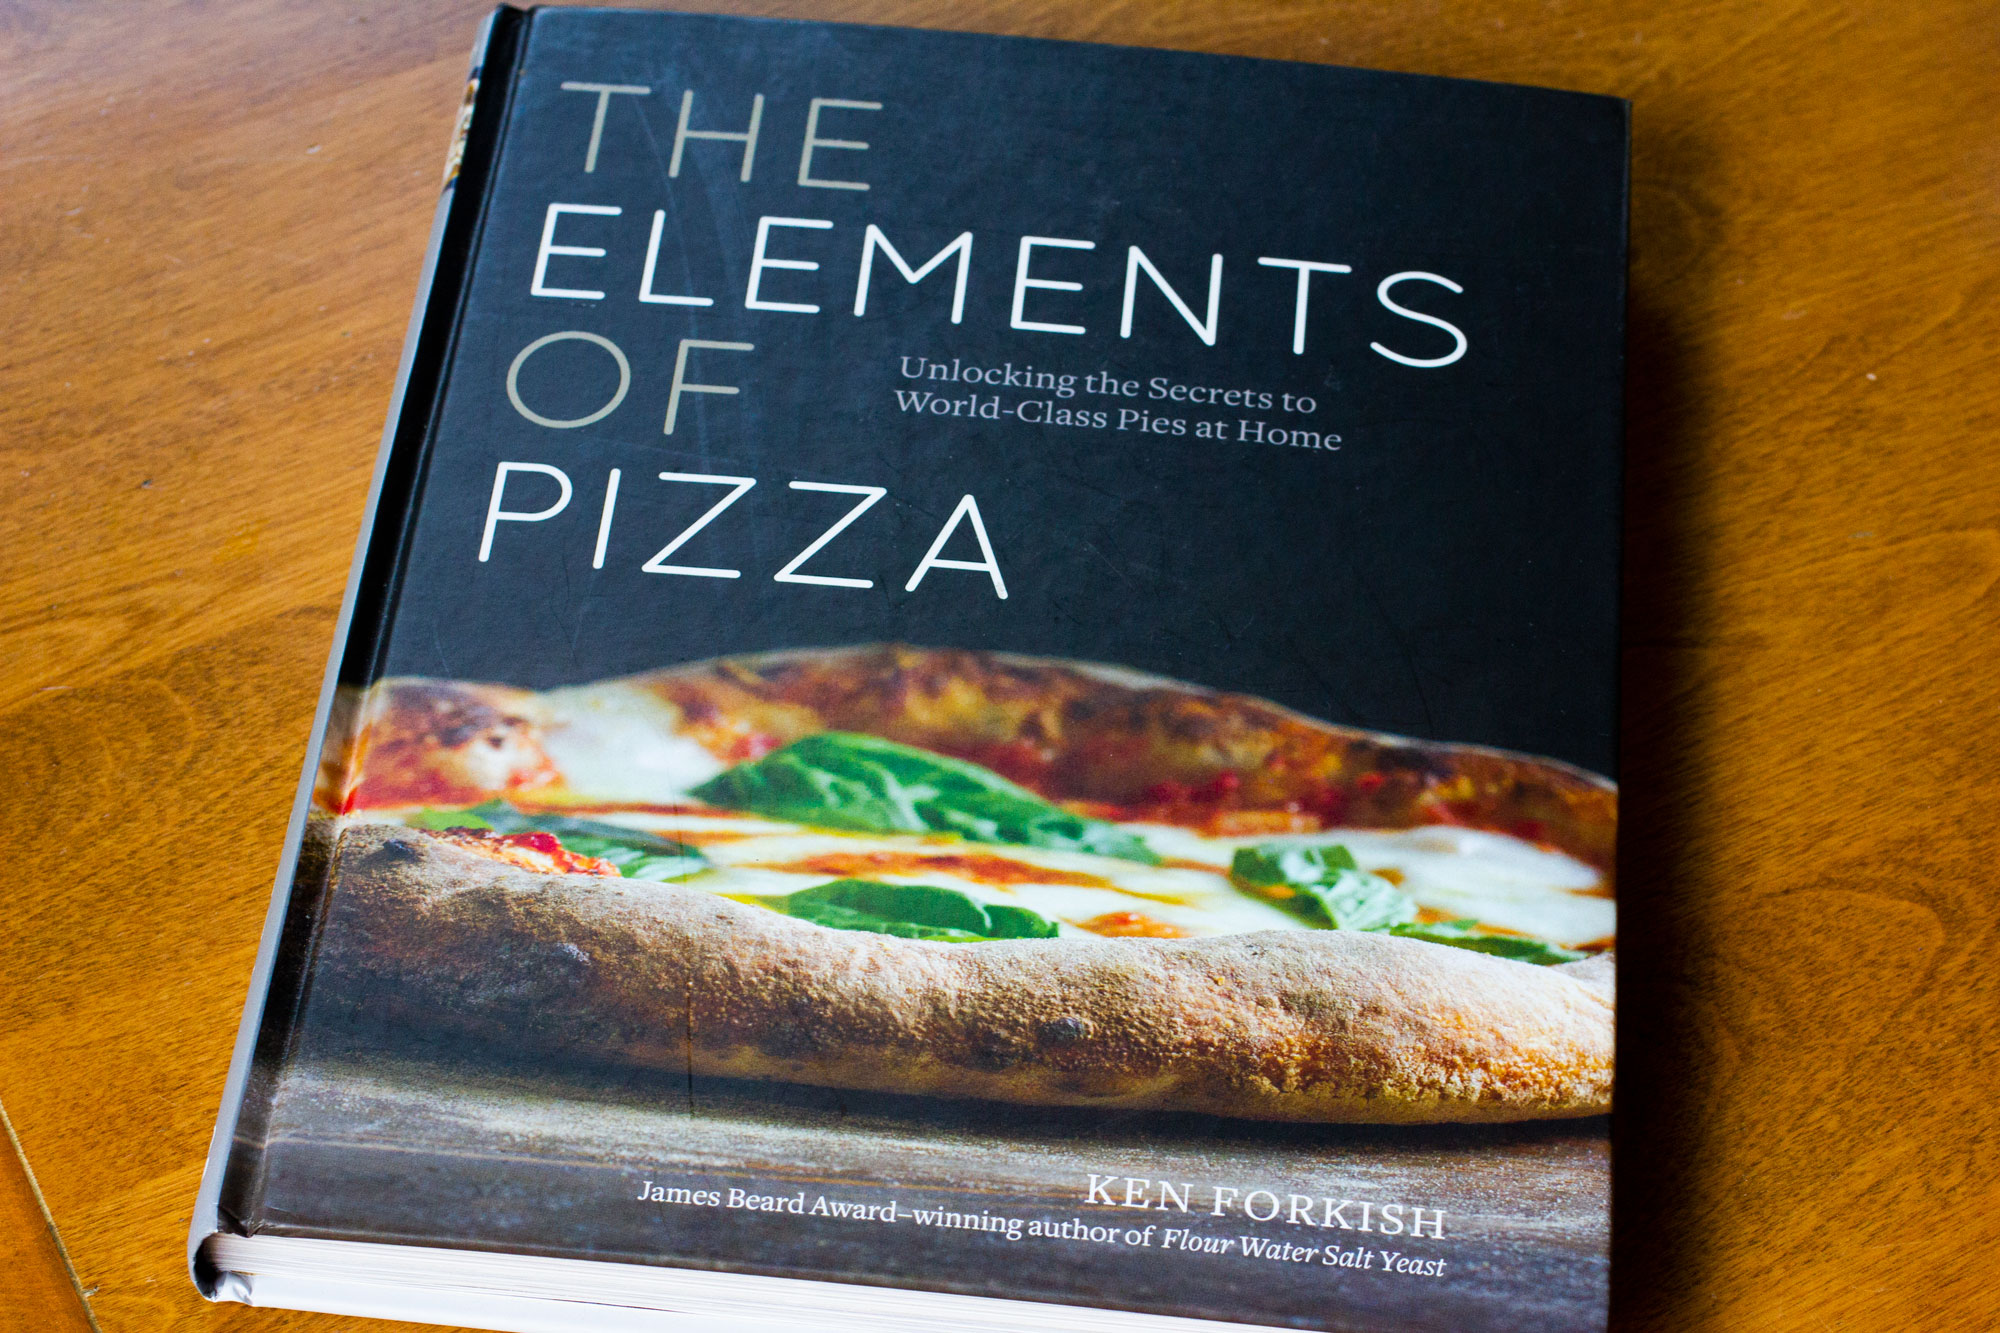 The Elements of Pizza